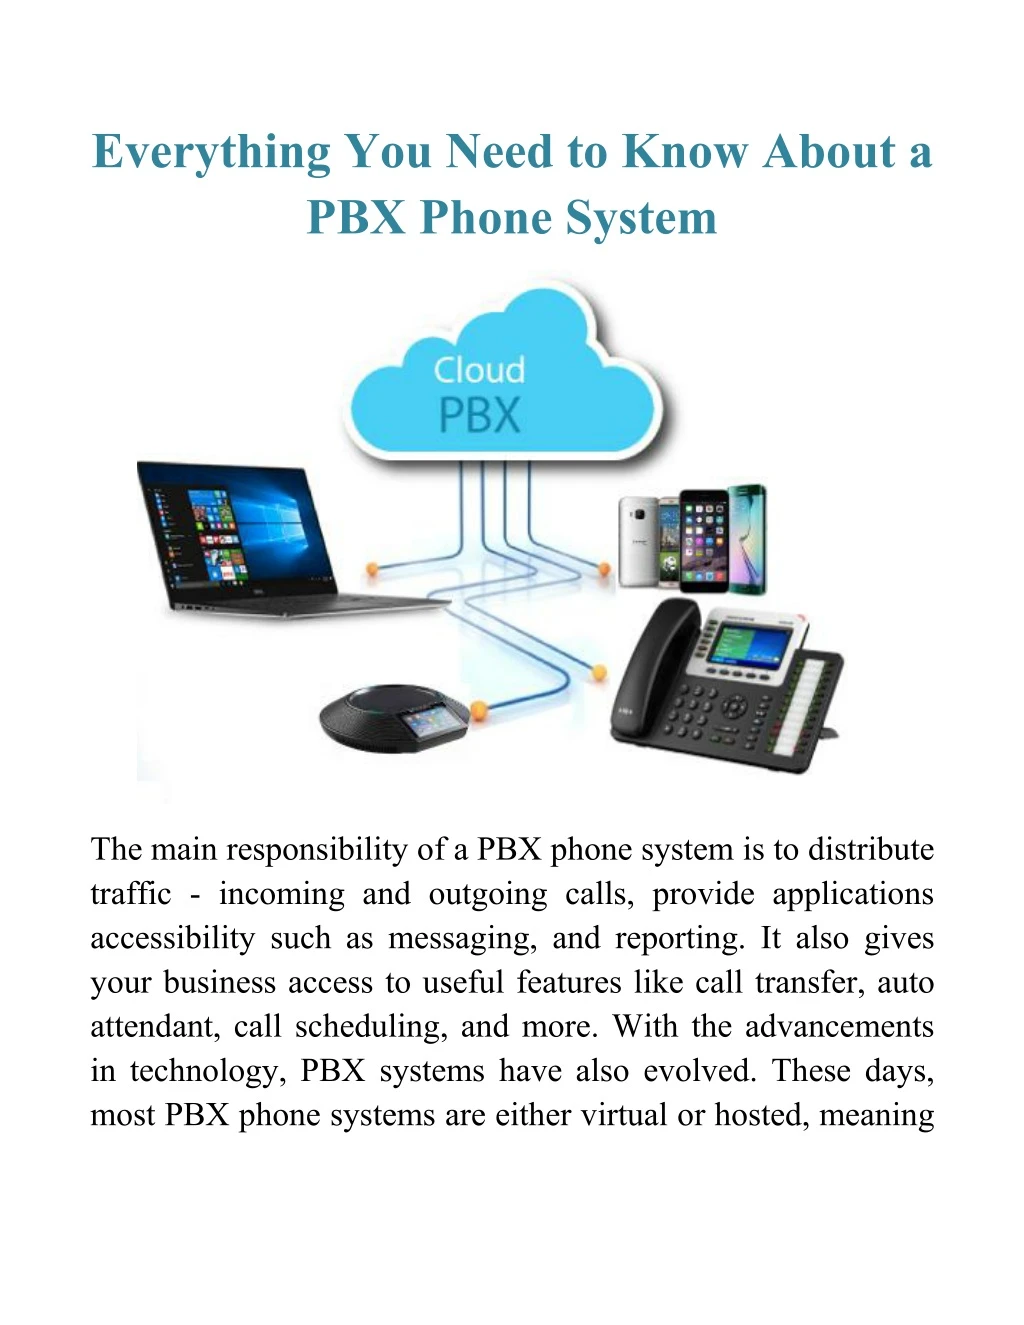 everything you need to know about a pbx phone